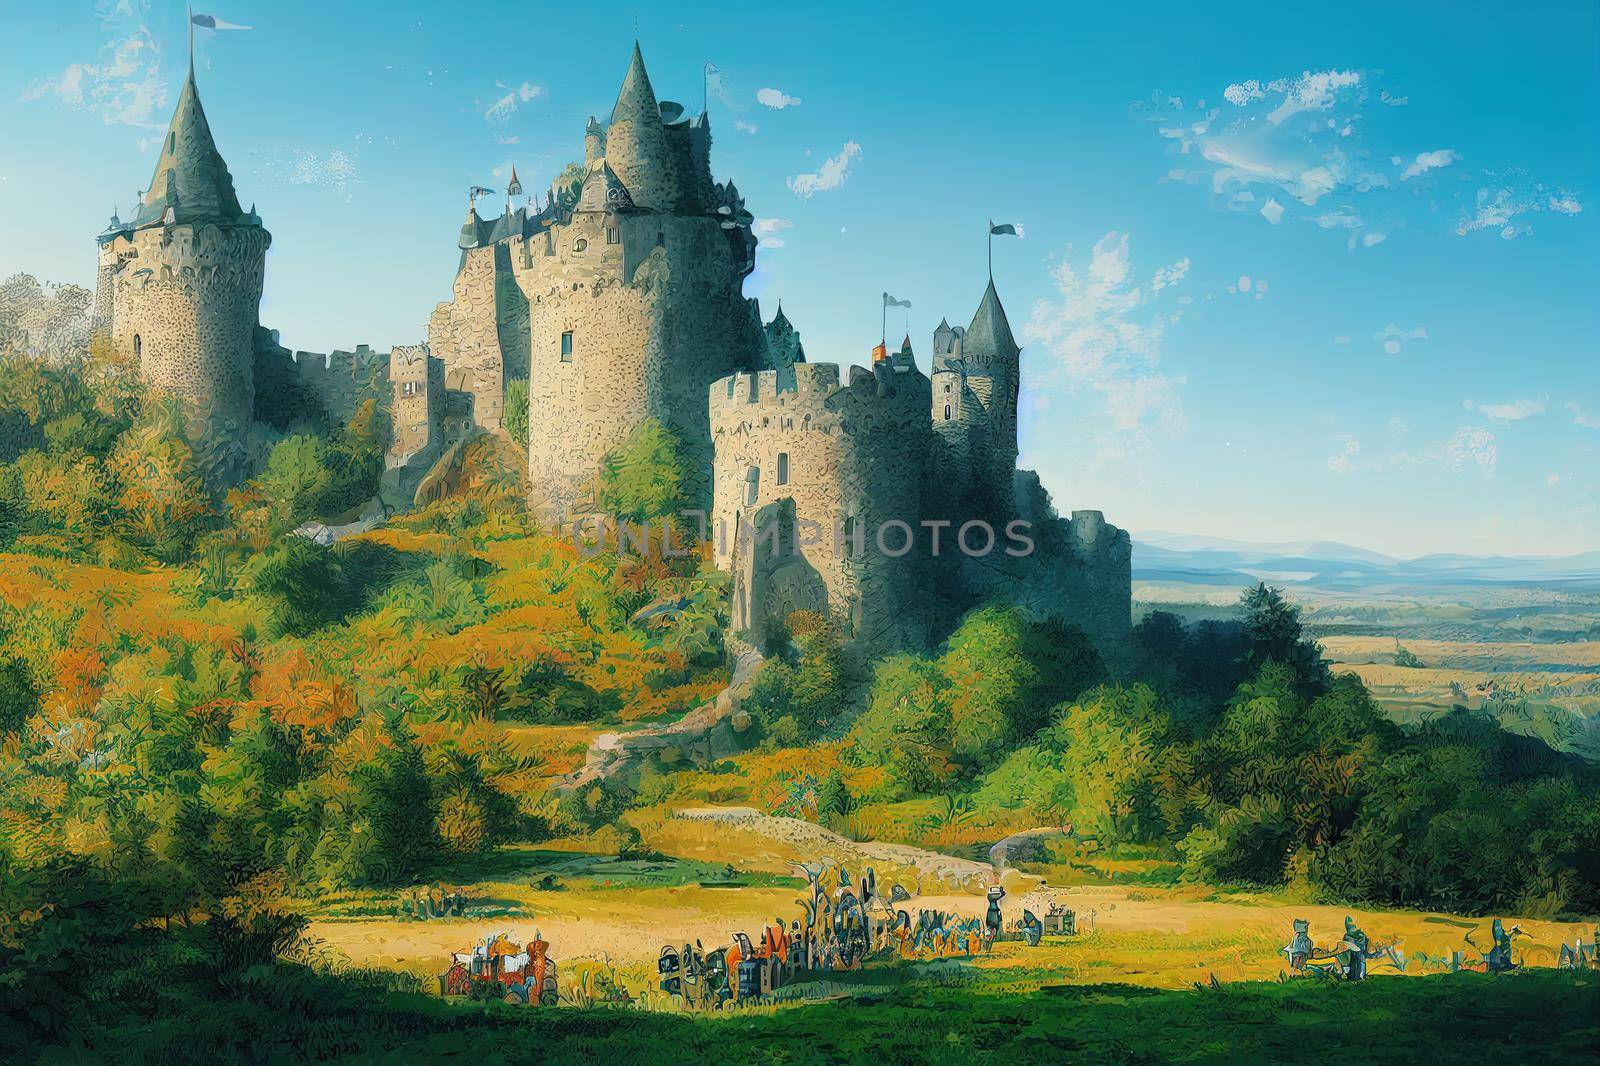 A landscape illustration of the medieval fantasy fortified castle by 2ragon